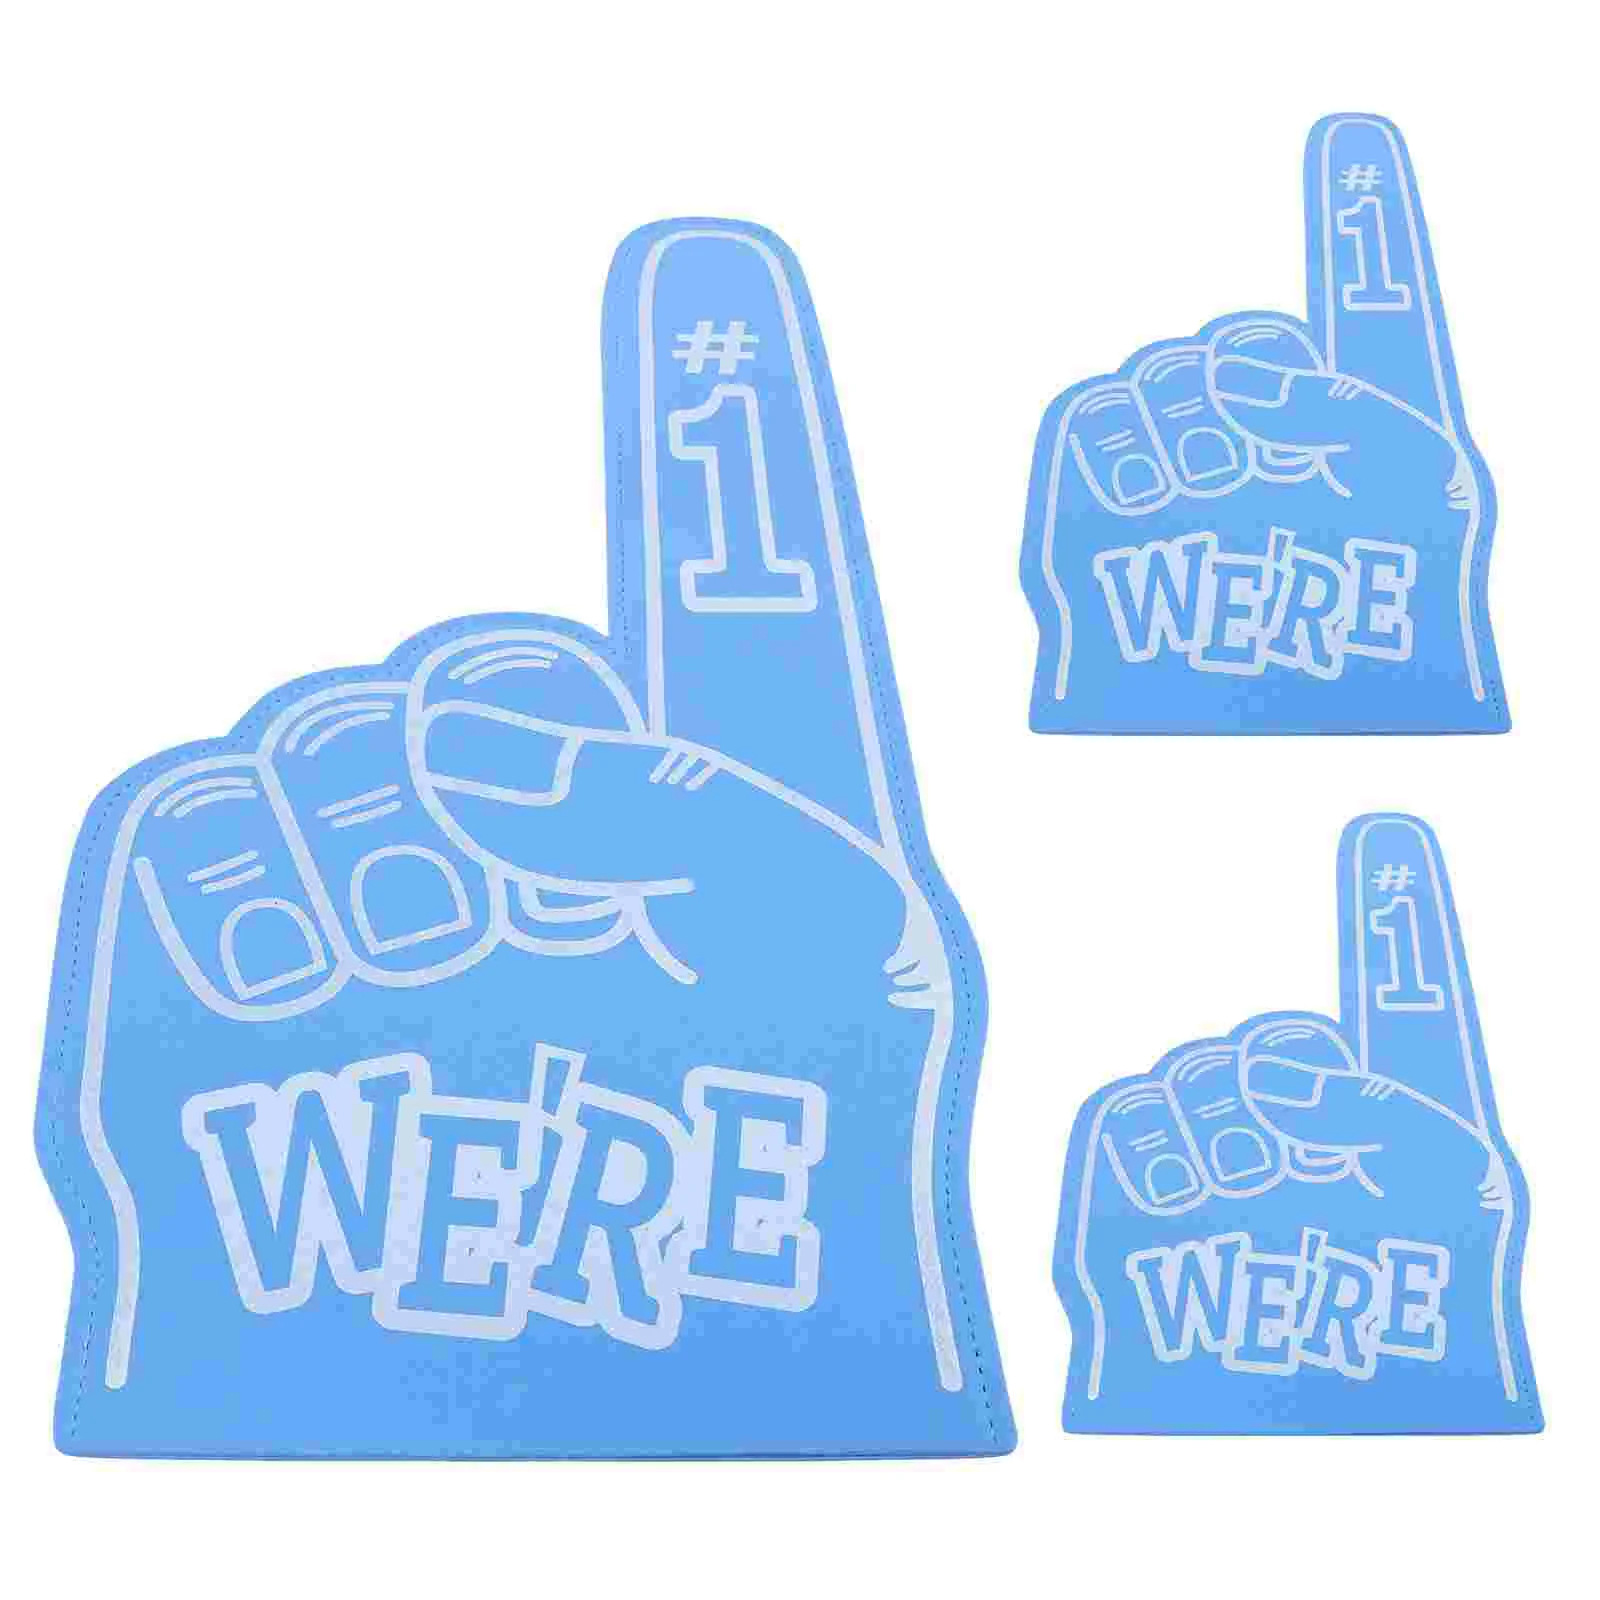 

3 Pcs Kid Toys Girls Foam Fingers Cheerleading Pompom Sports Cheering Bulk Noise Makers Party Favors Football Game Child